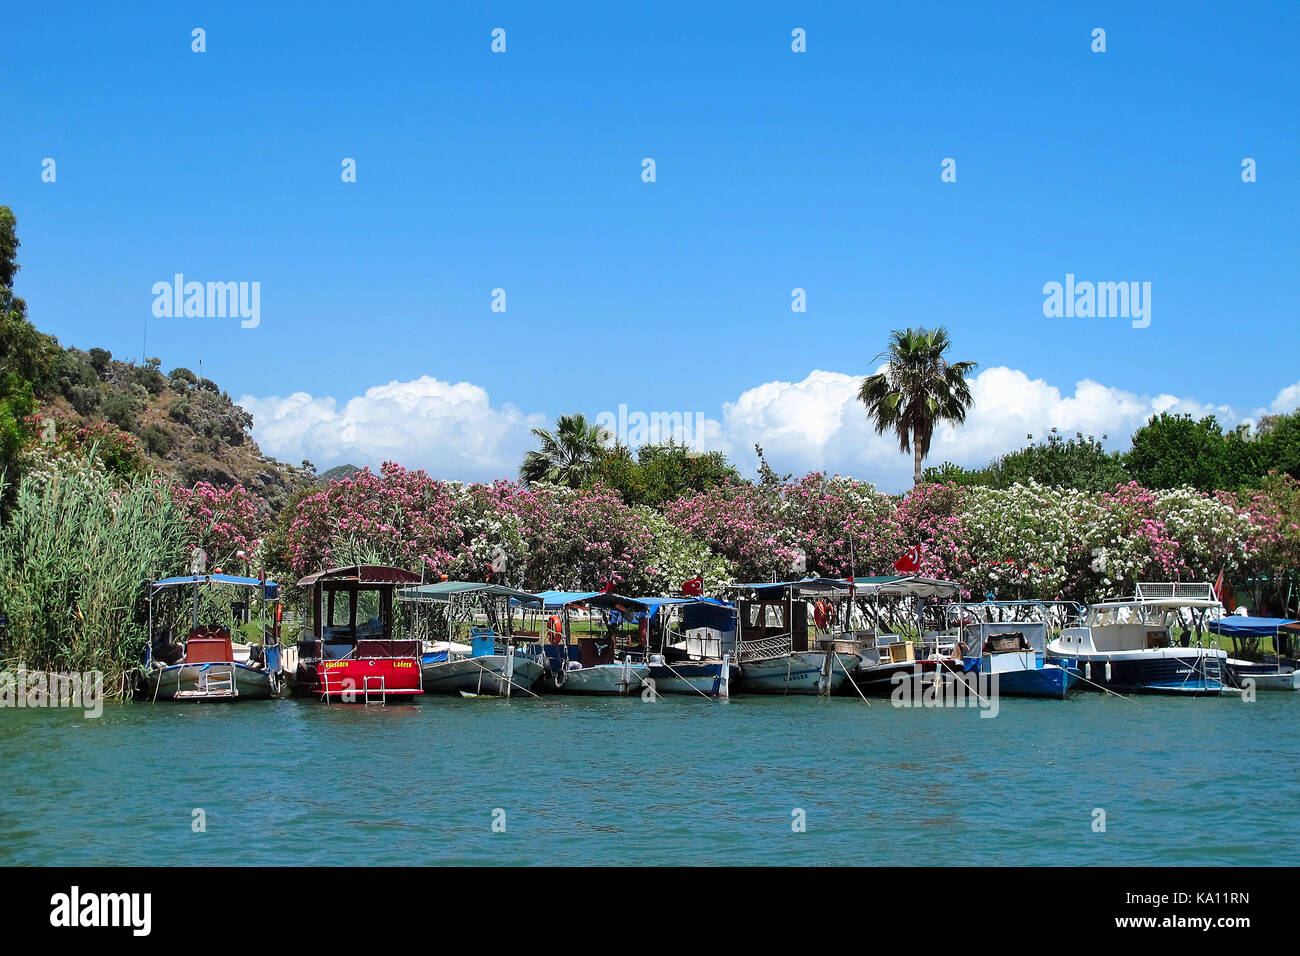 Boats covered in Oleander flowers along the pretty riverbank town of Dalyan, Turkey Stock Photo